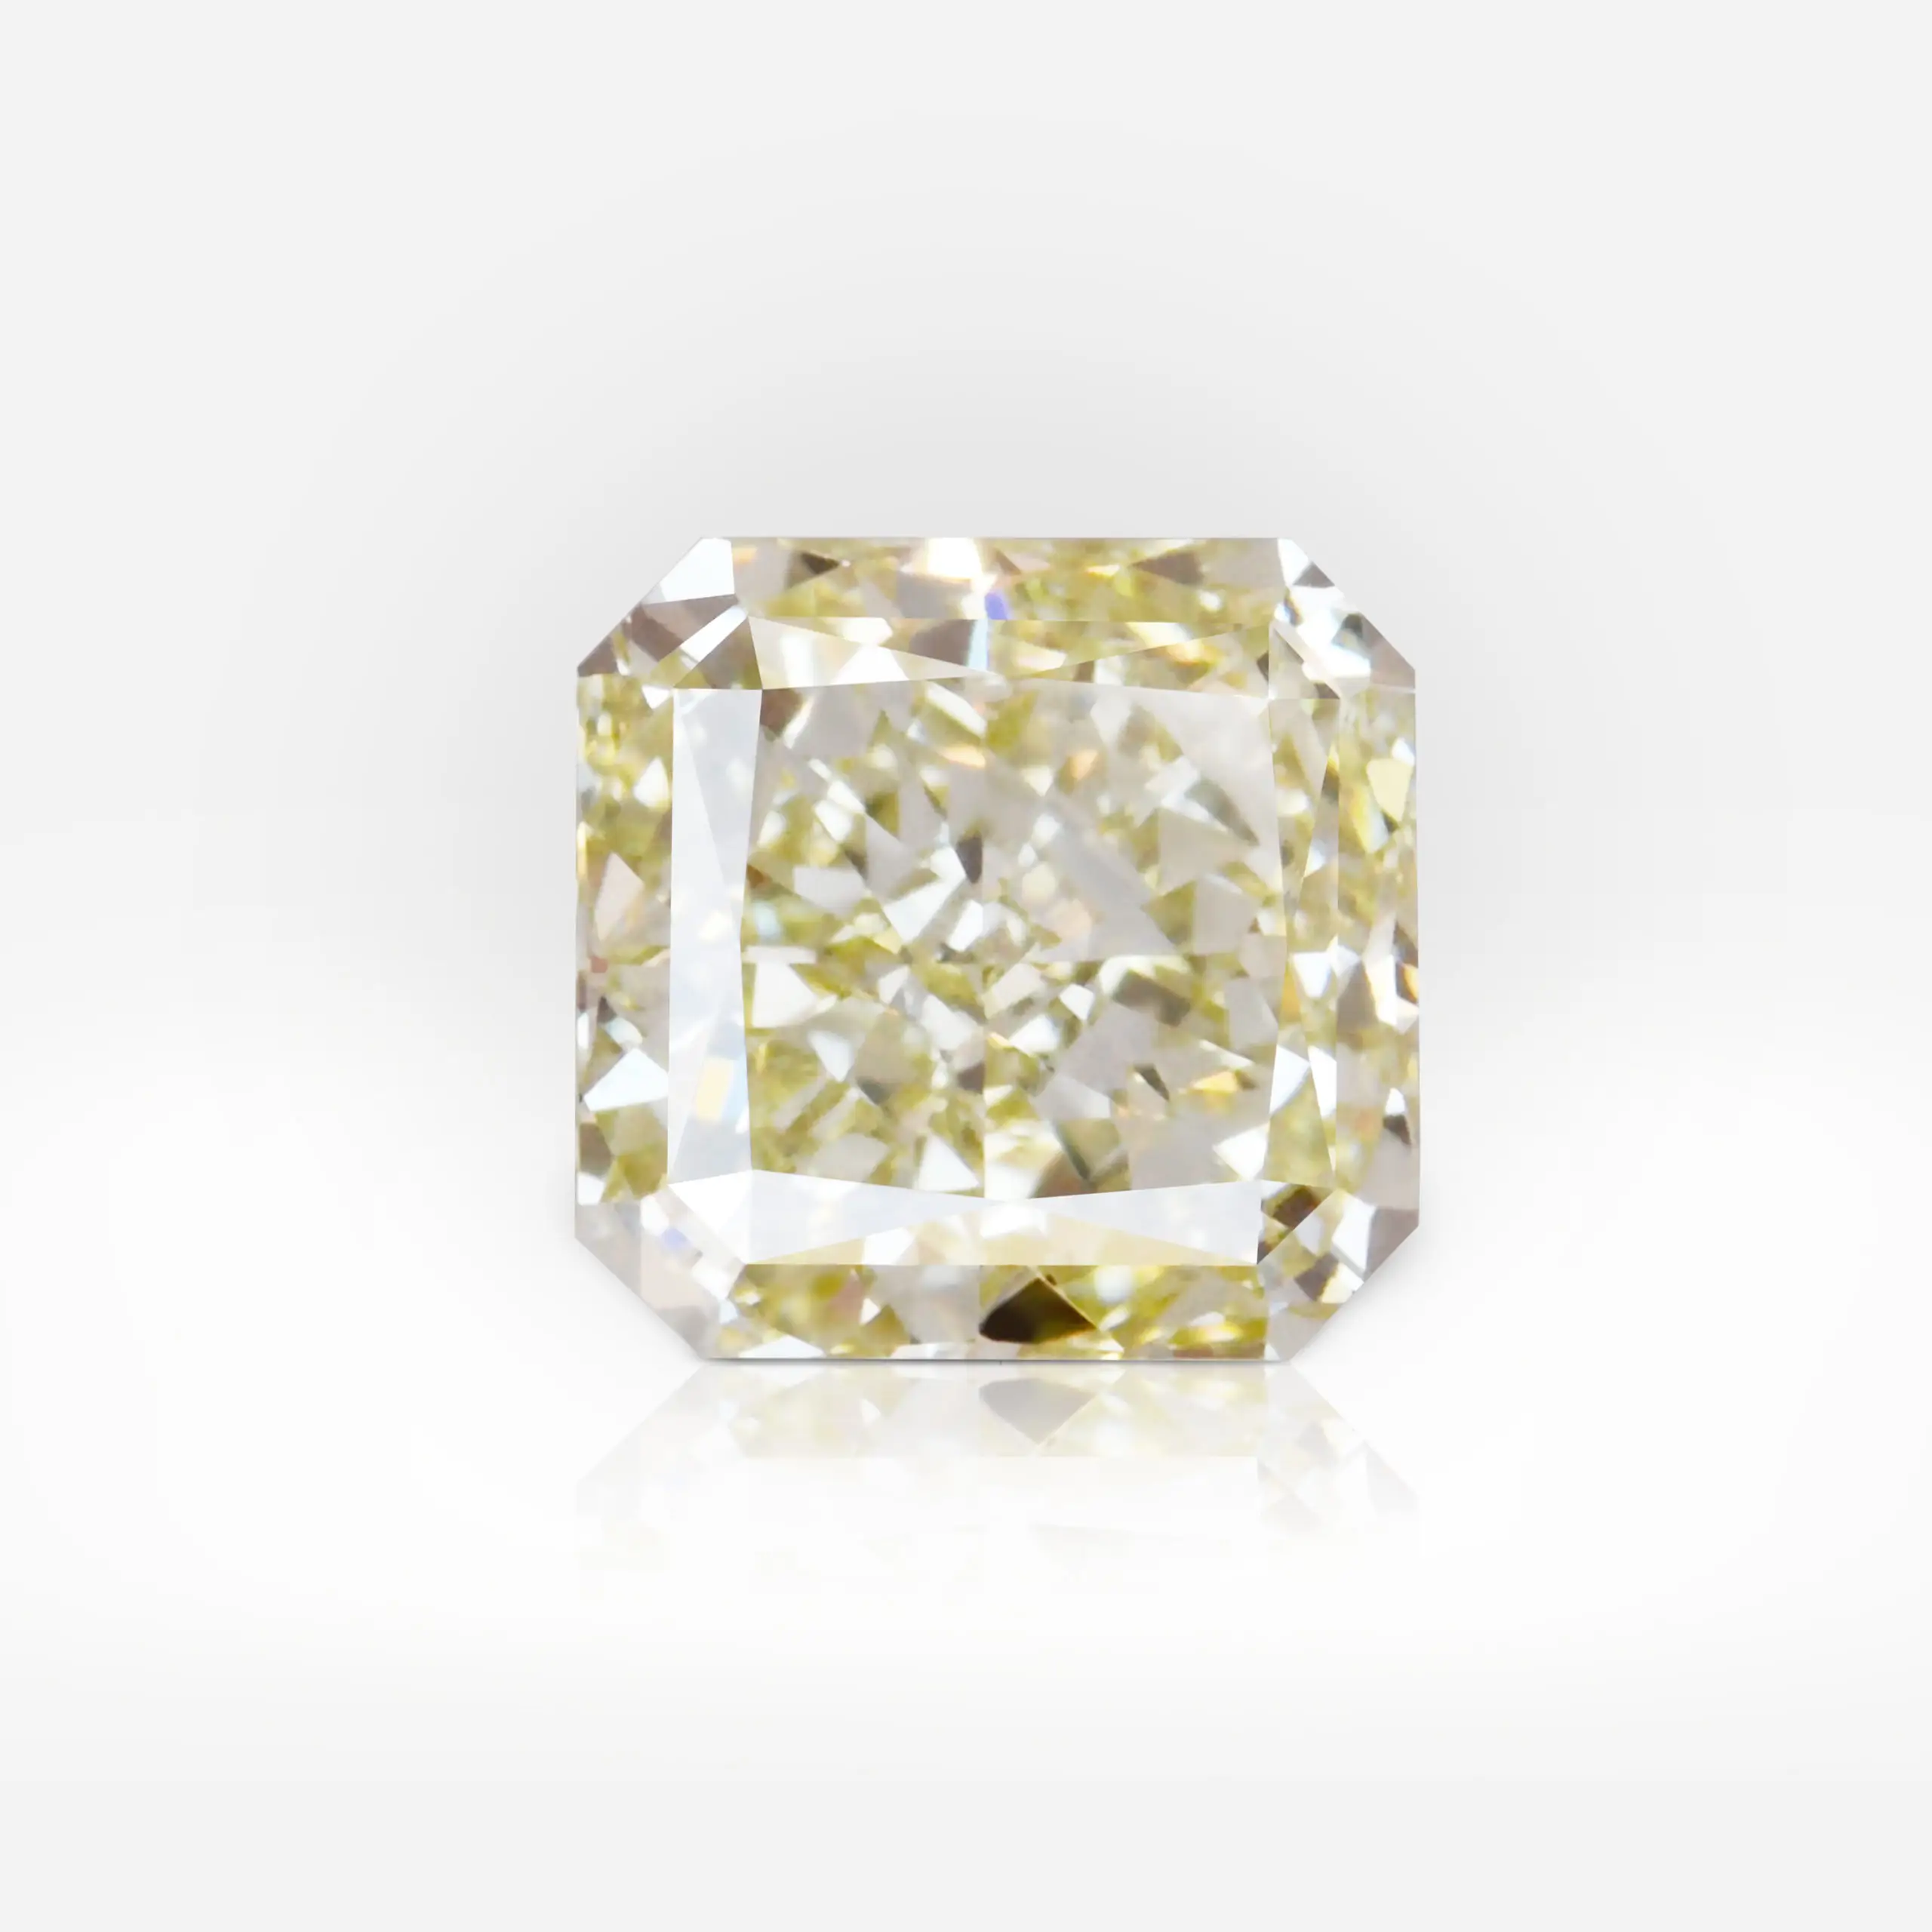 1.04 carat Fancy Light Greenish Yellow SI1 Radiant Shape Dimond GIA - picture 1